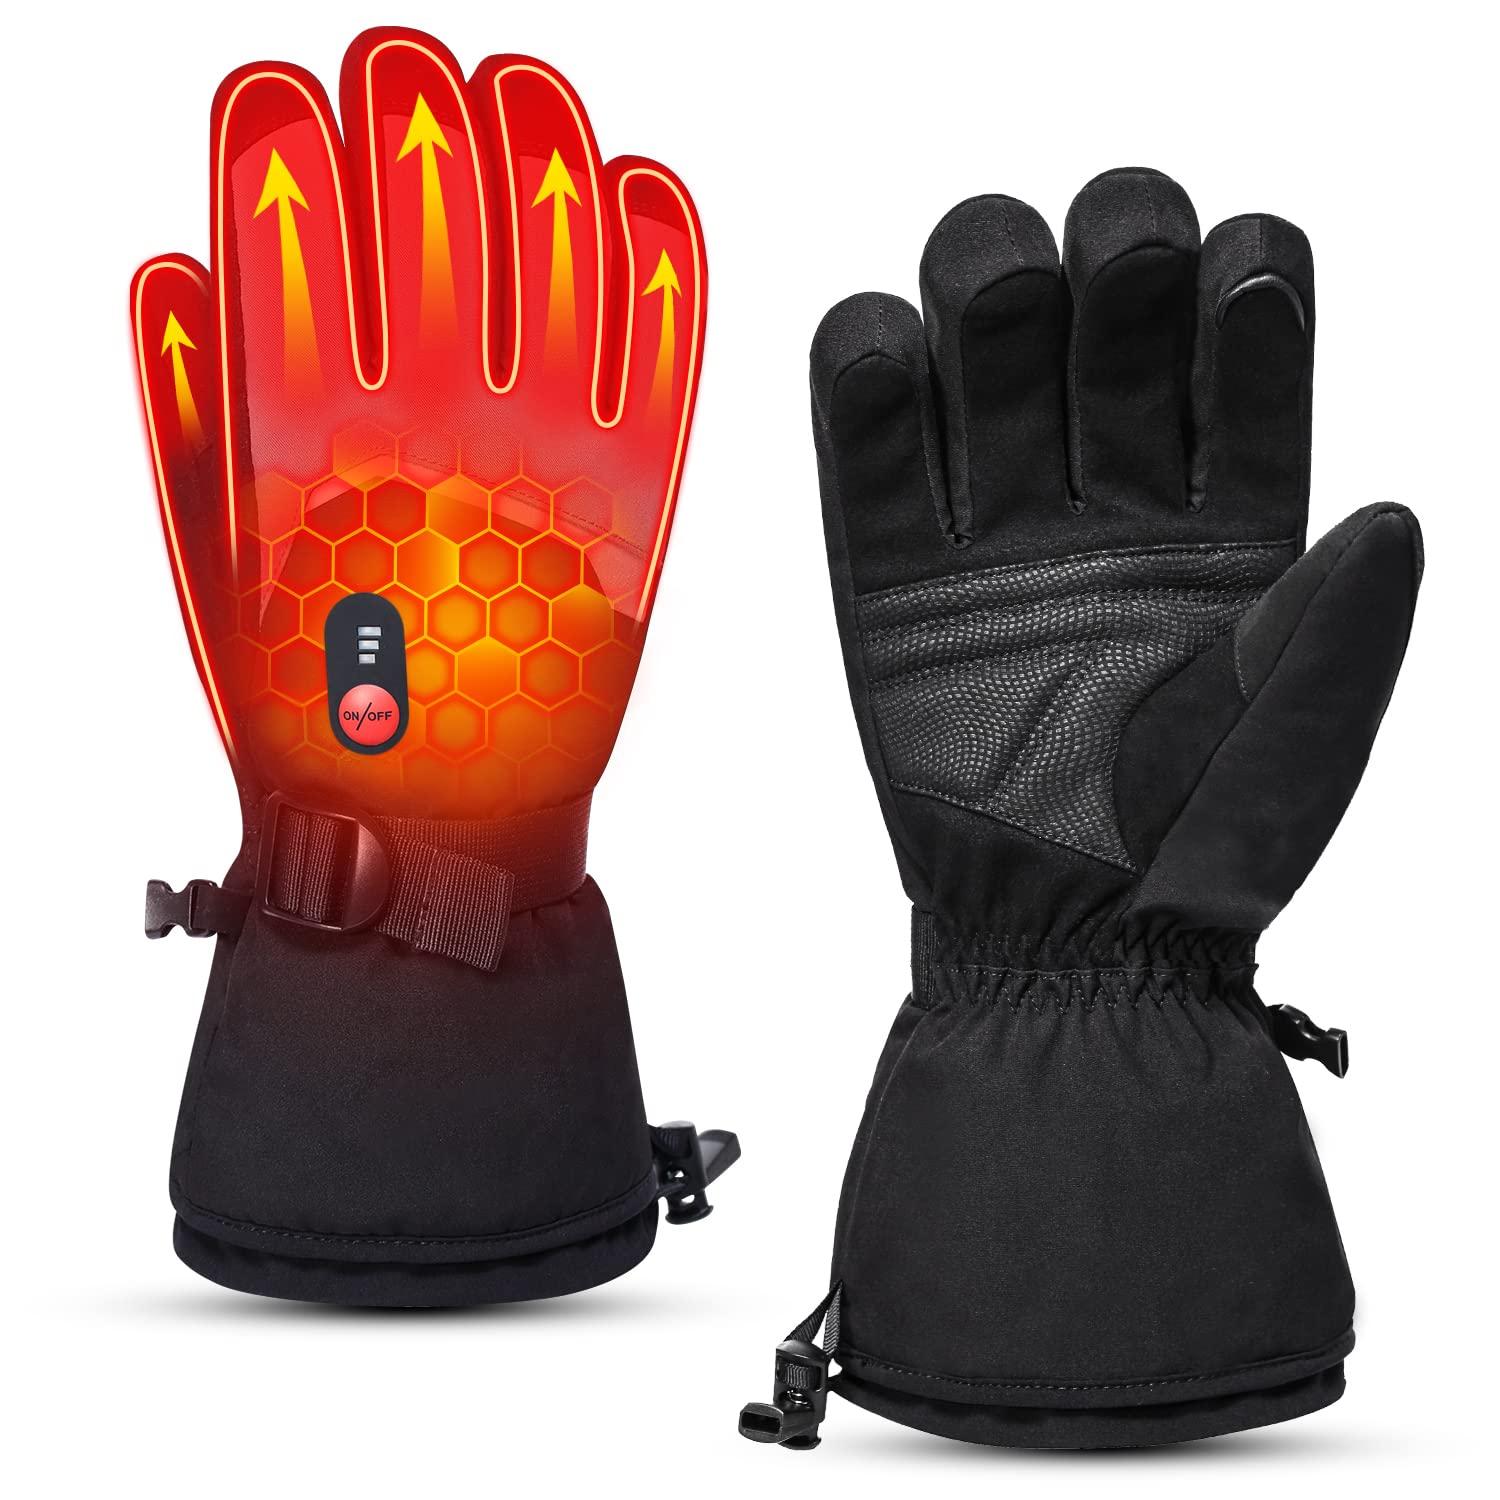 Day Wolf 7.4V Unisex Featherweight Battery Heated Gloves